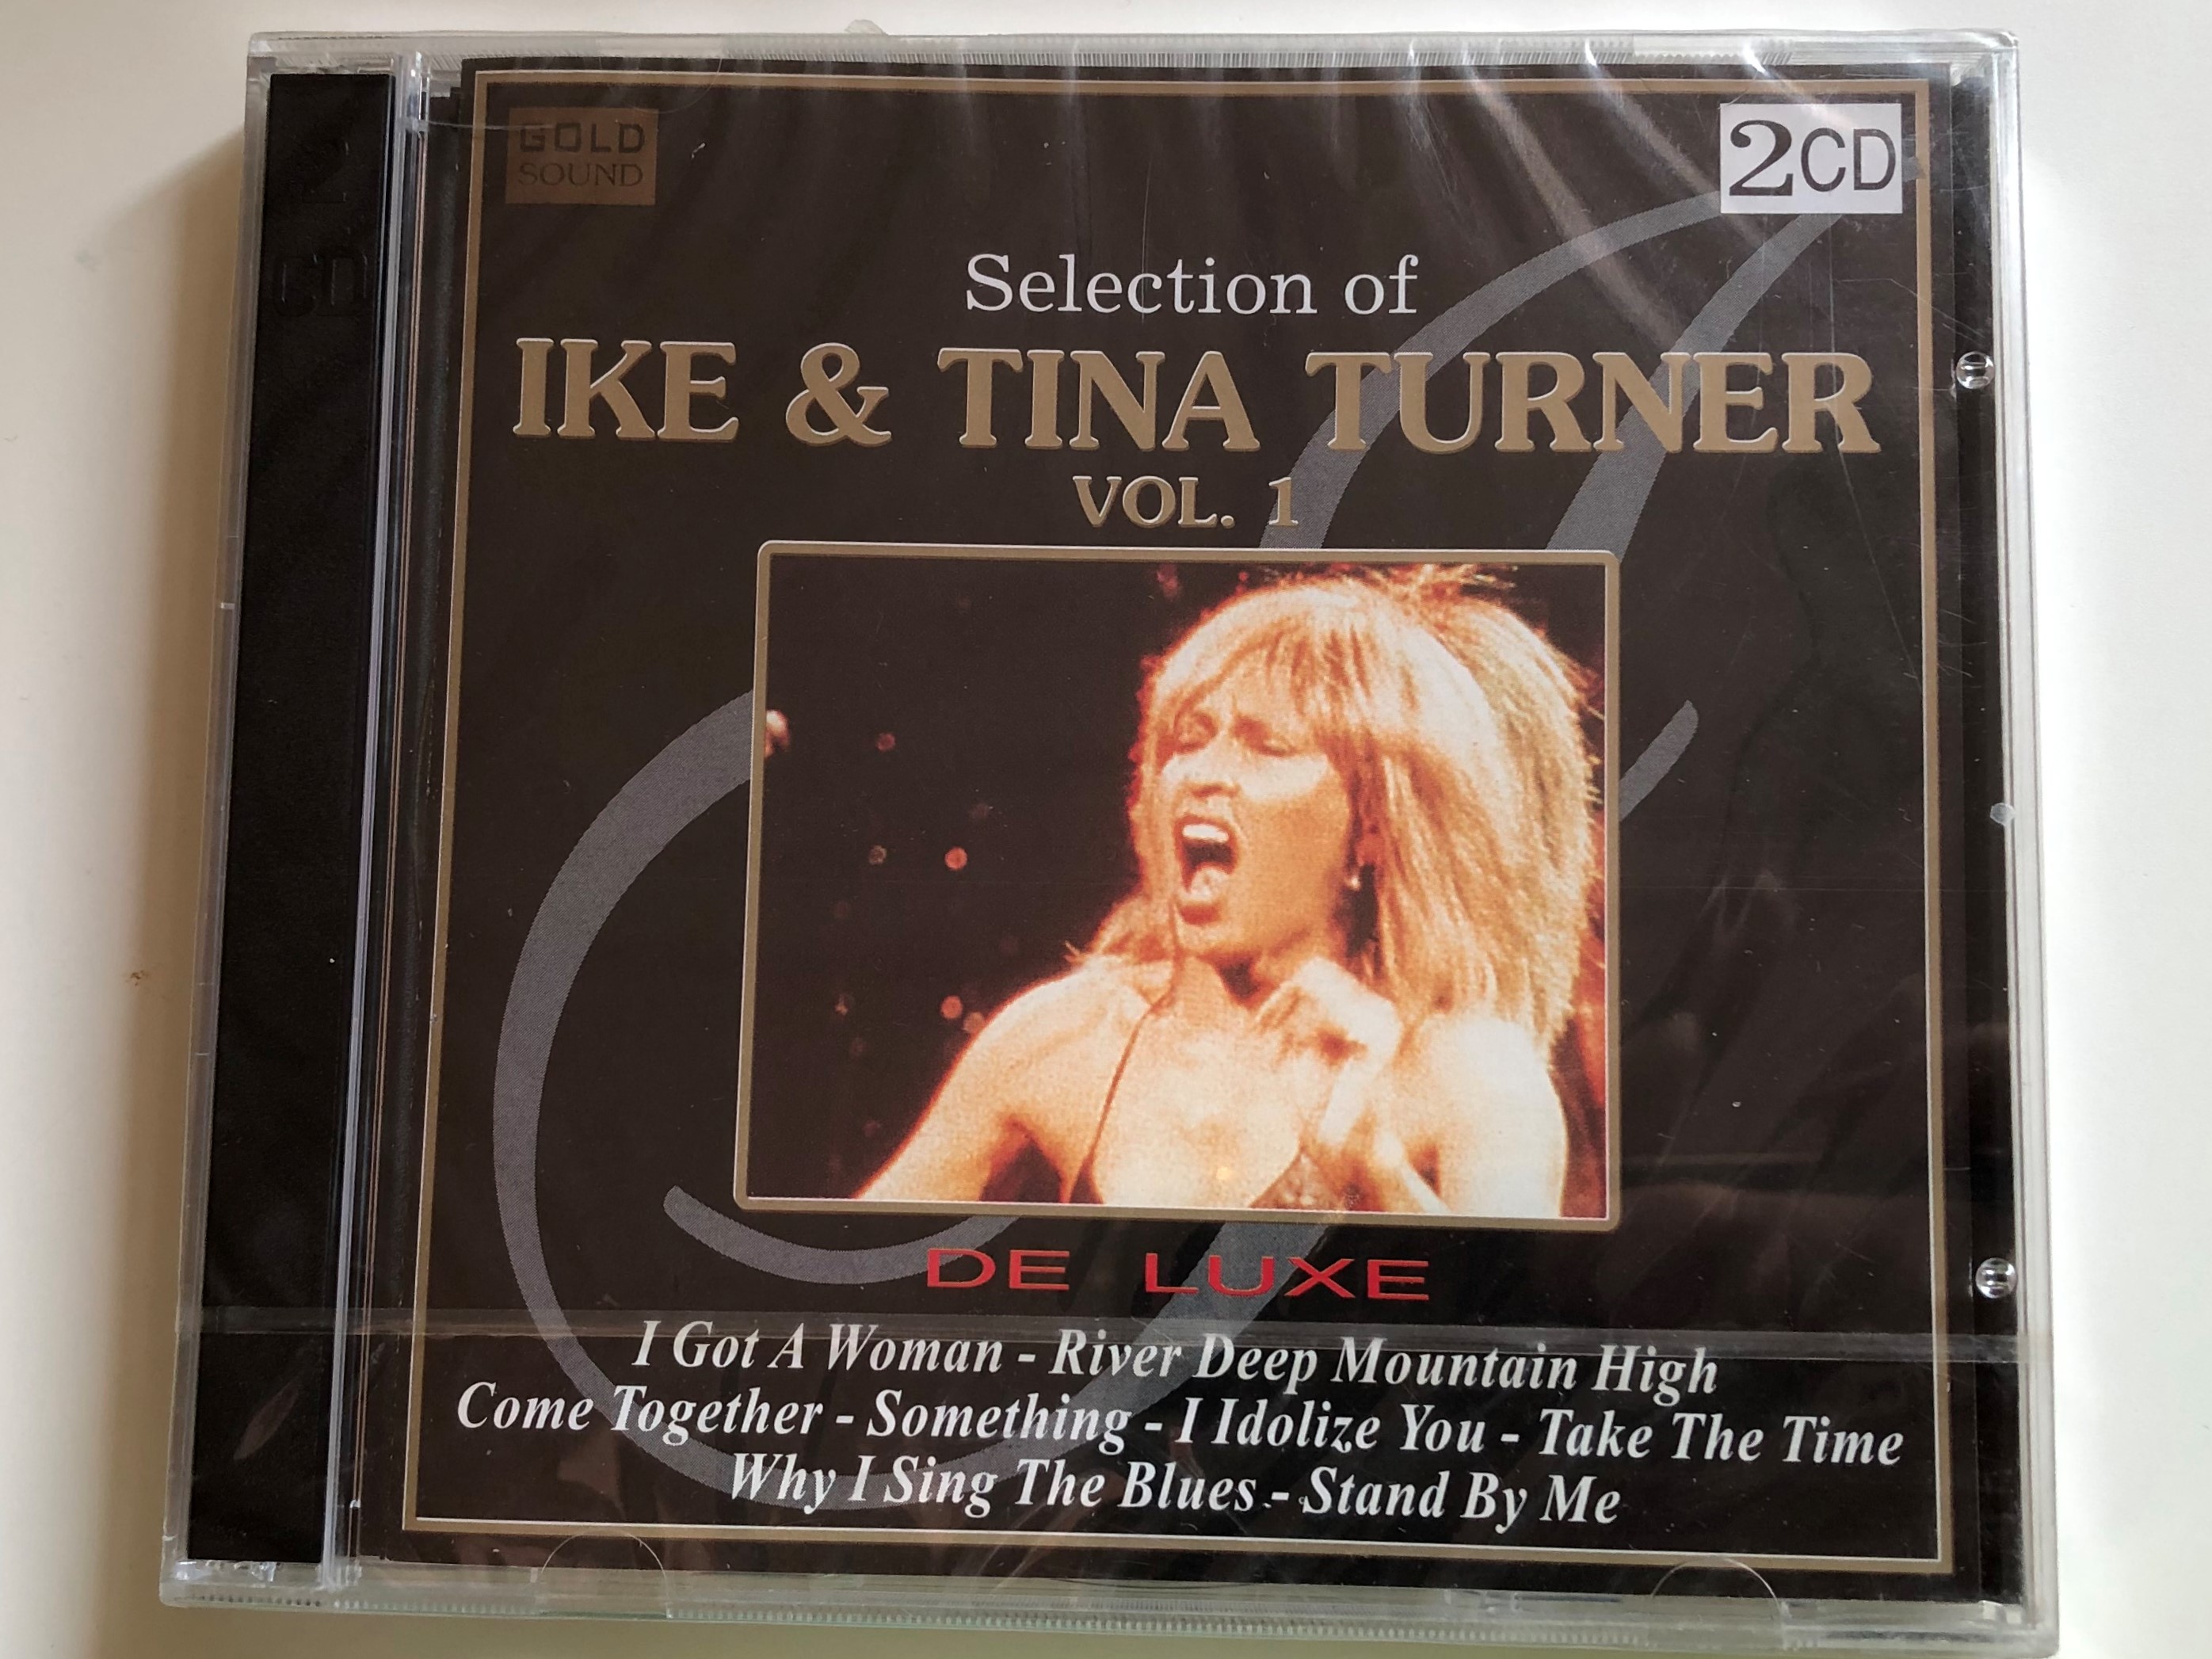 selection-of-ike-tina-turner-vol.-1-de-luxe-i-got-a-woman-river-deep-mountain-high-come-together-something-i-idolize-you-take-the-time-why-i-sing-the-blues-stand-by-me-gold-sound-2-1-.jpg